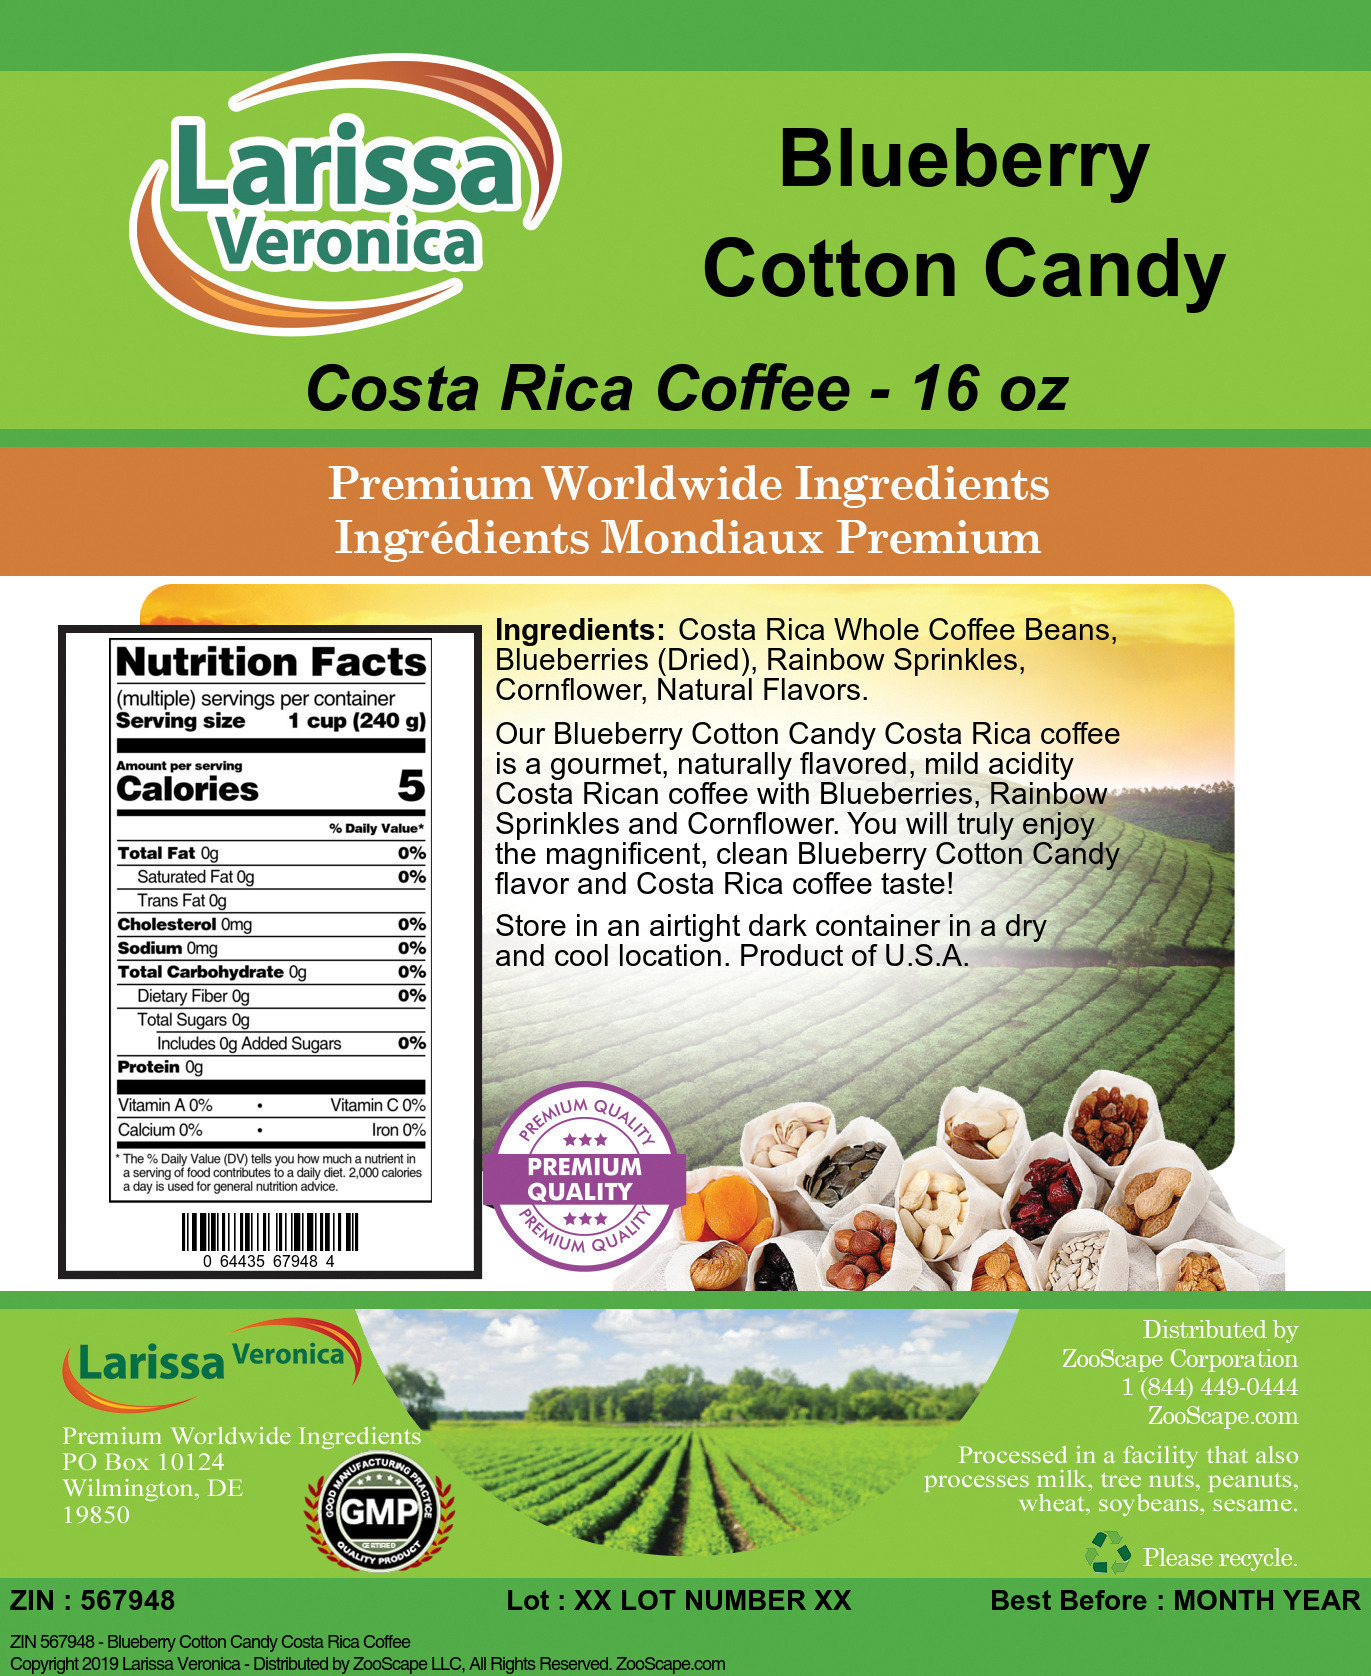 Blueberry Cotton Candy Costa Rica Coffee - Label